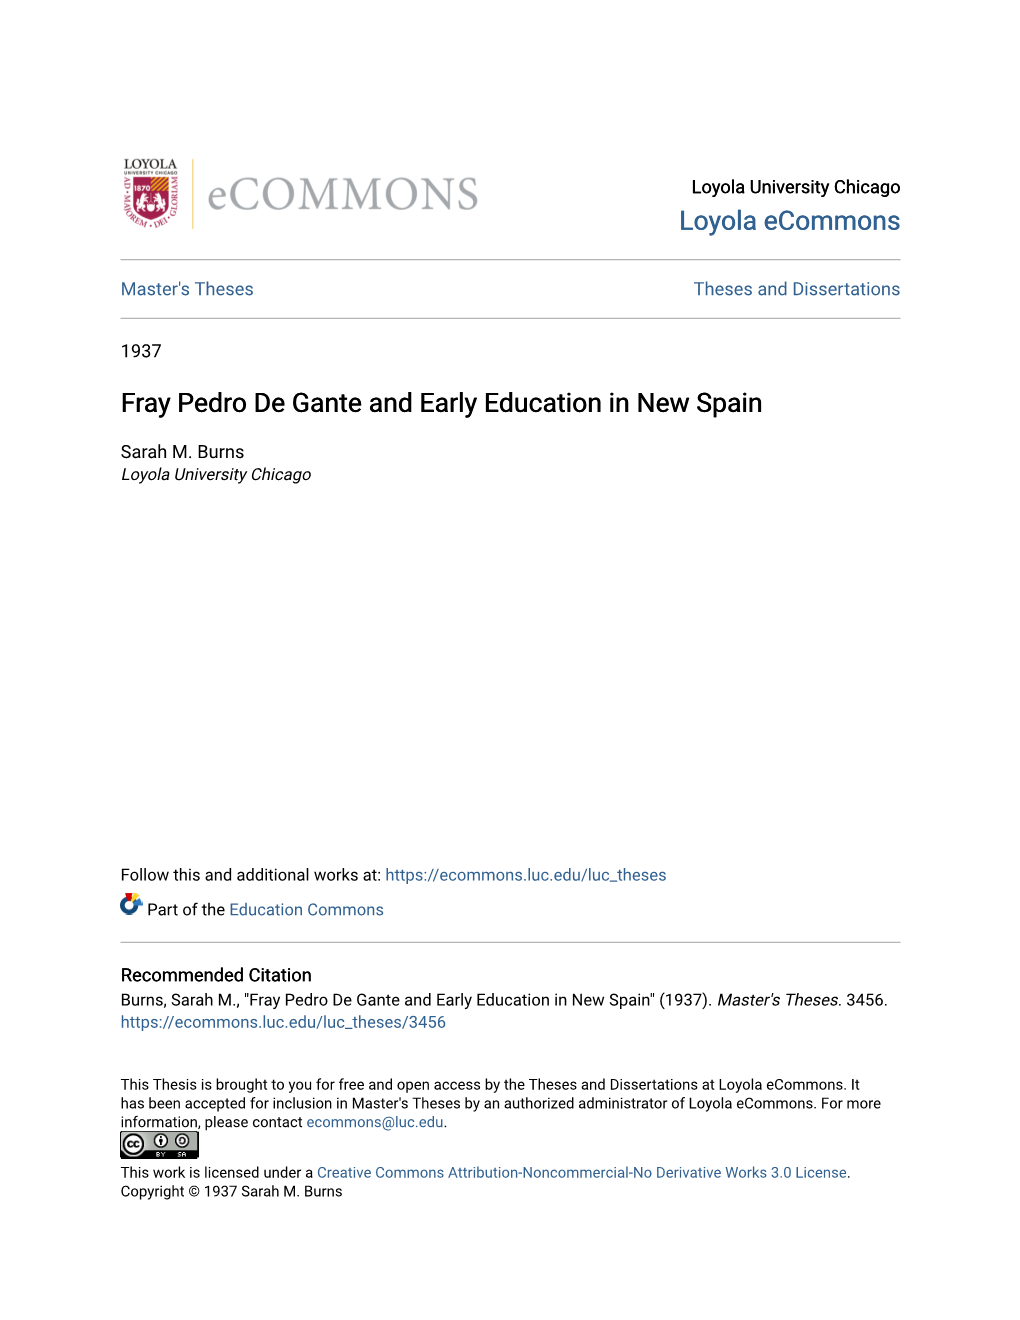 Fray Pedro De Gante and Early Education in New Spain